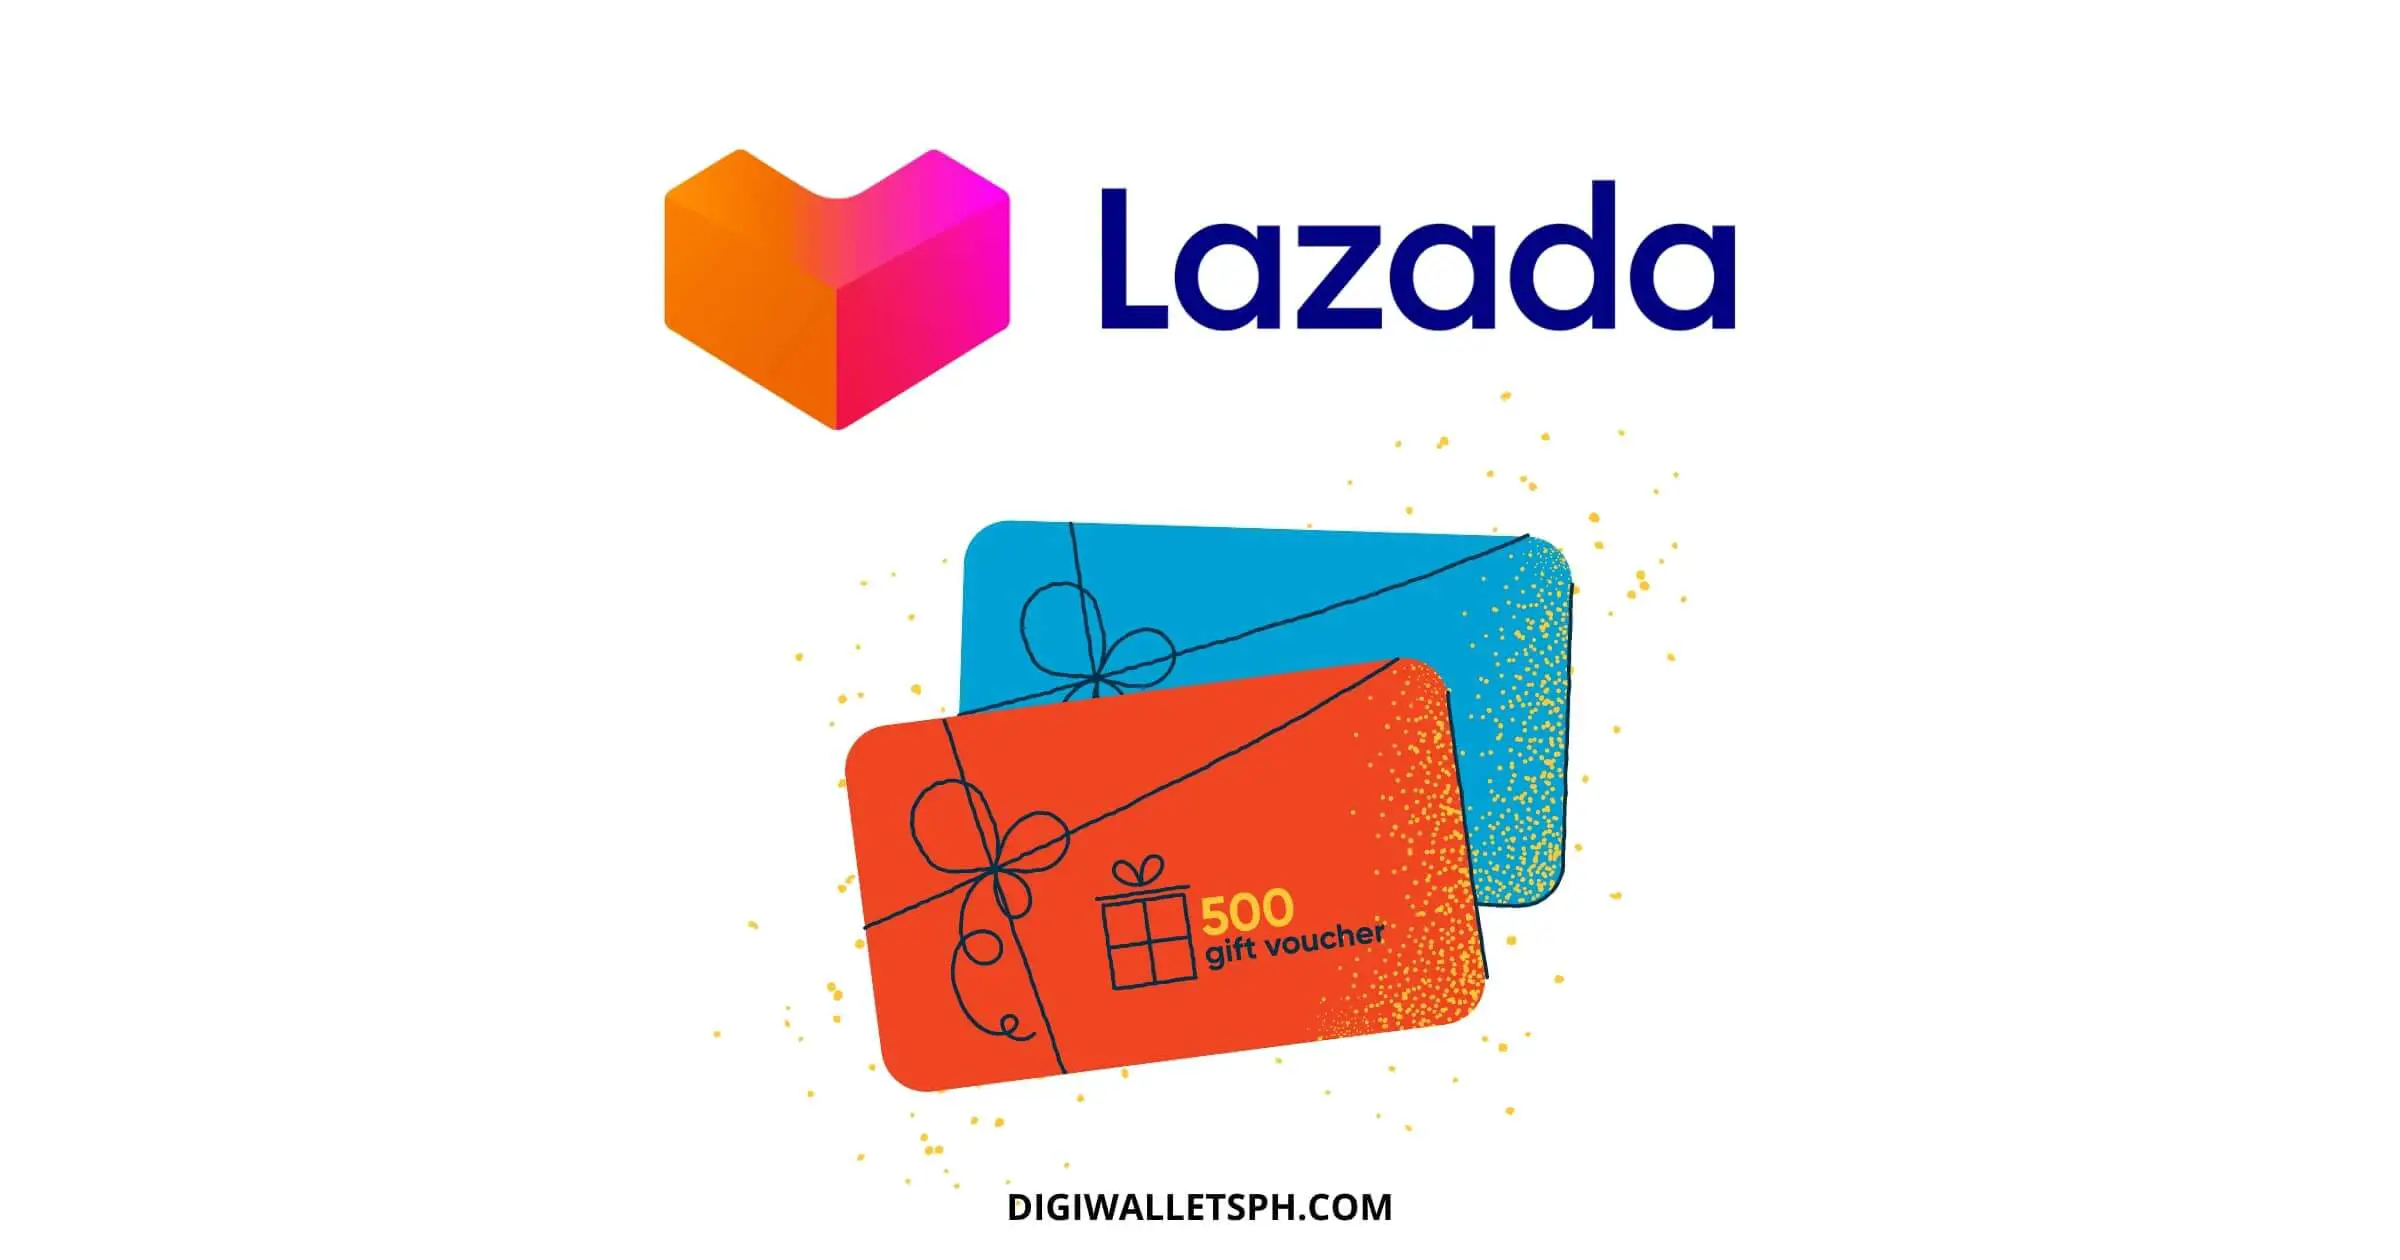 How to use Lazada gift cards